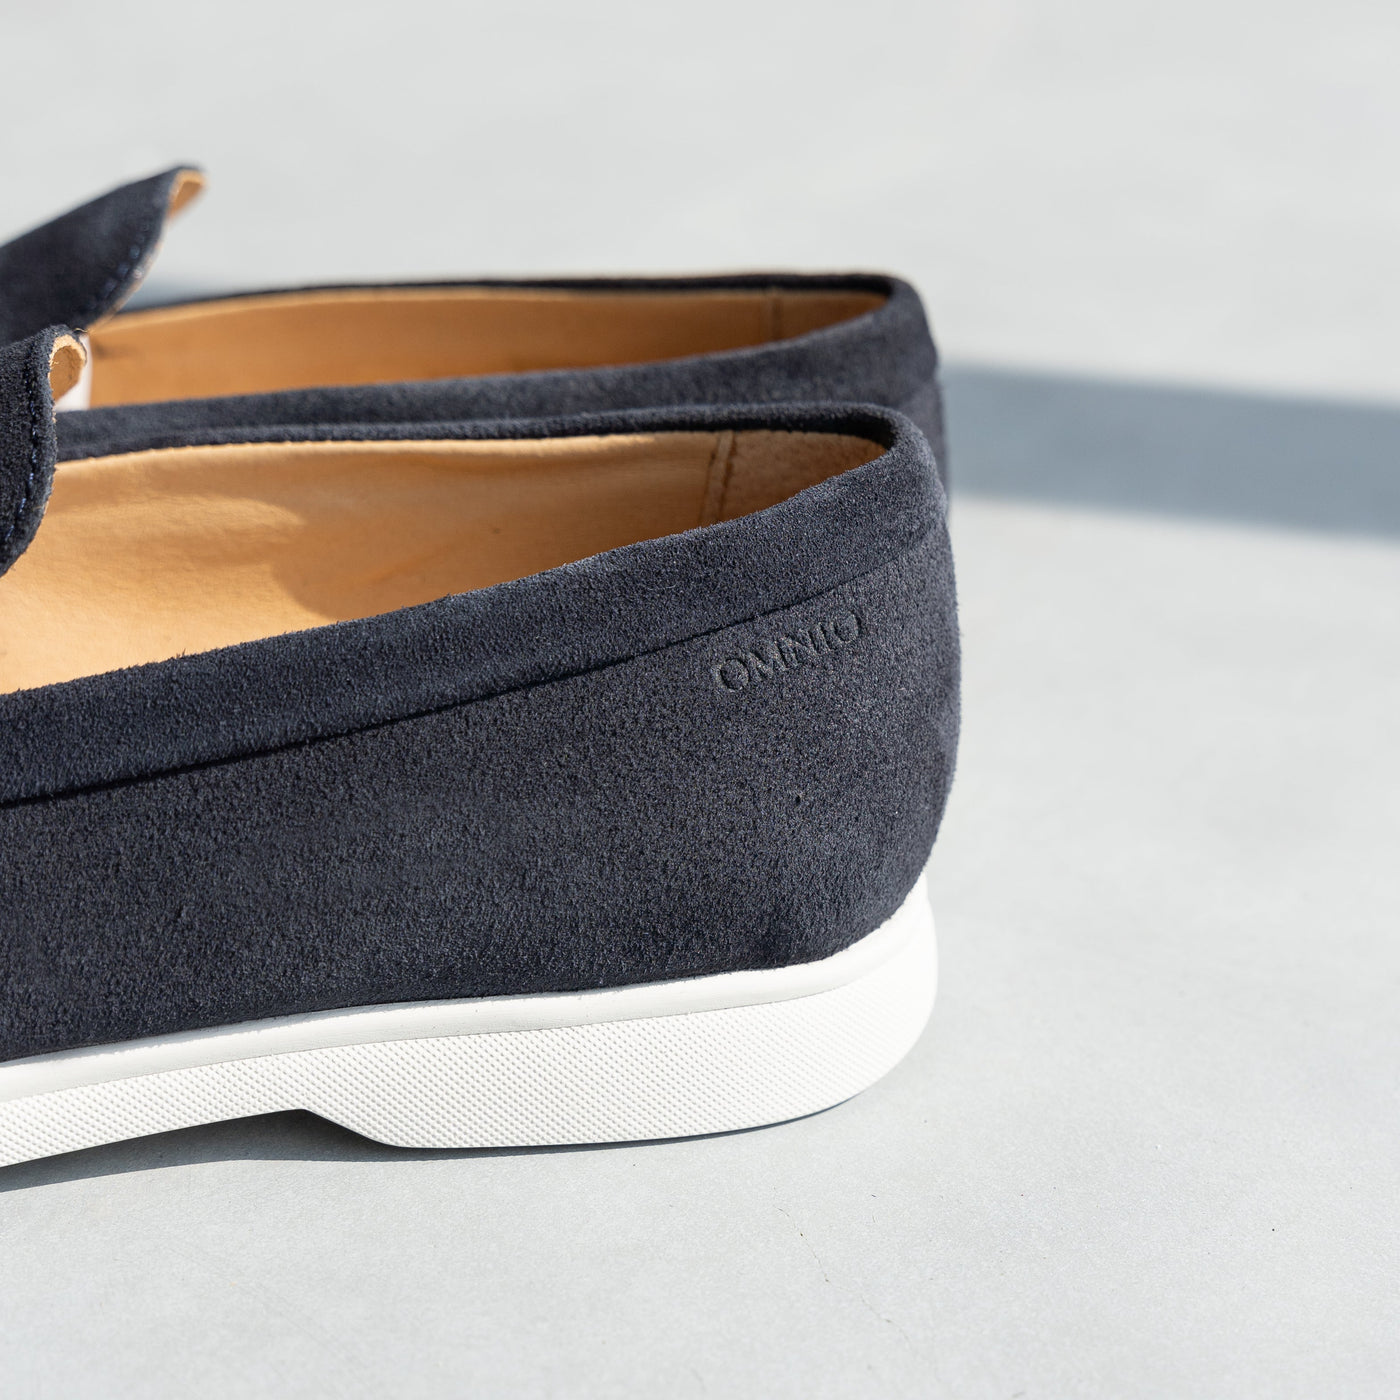 ACE LOAFER Navy Suede